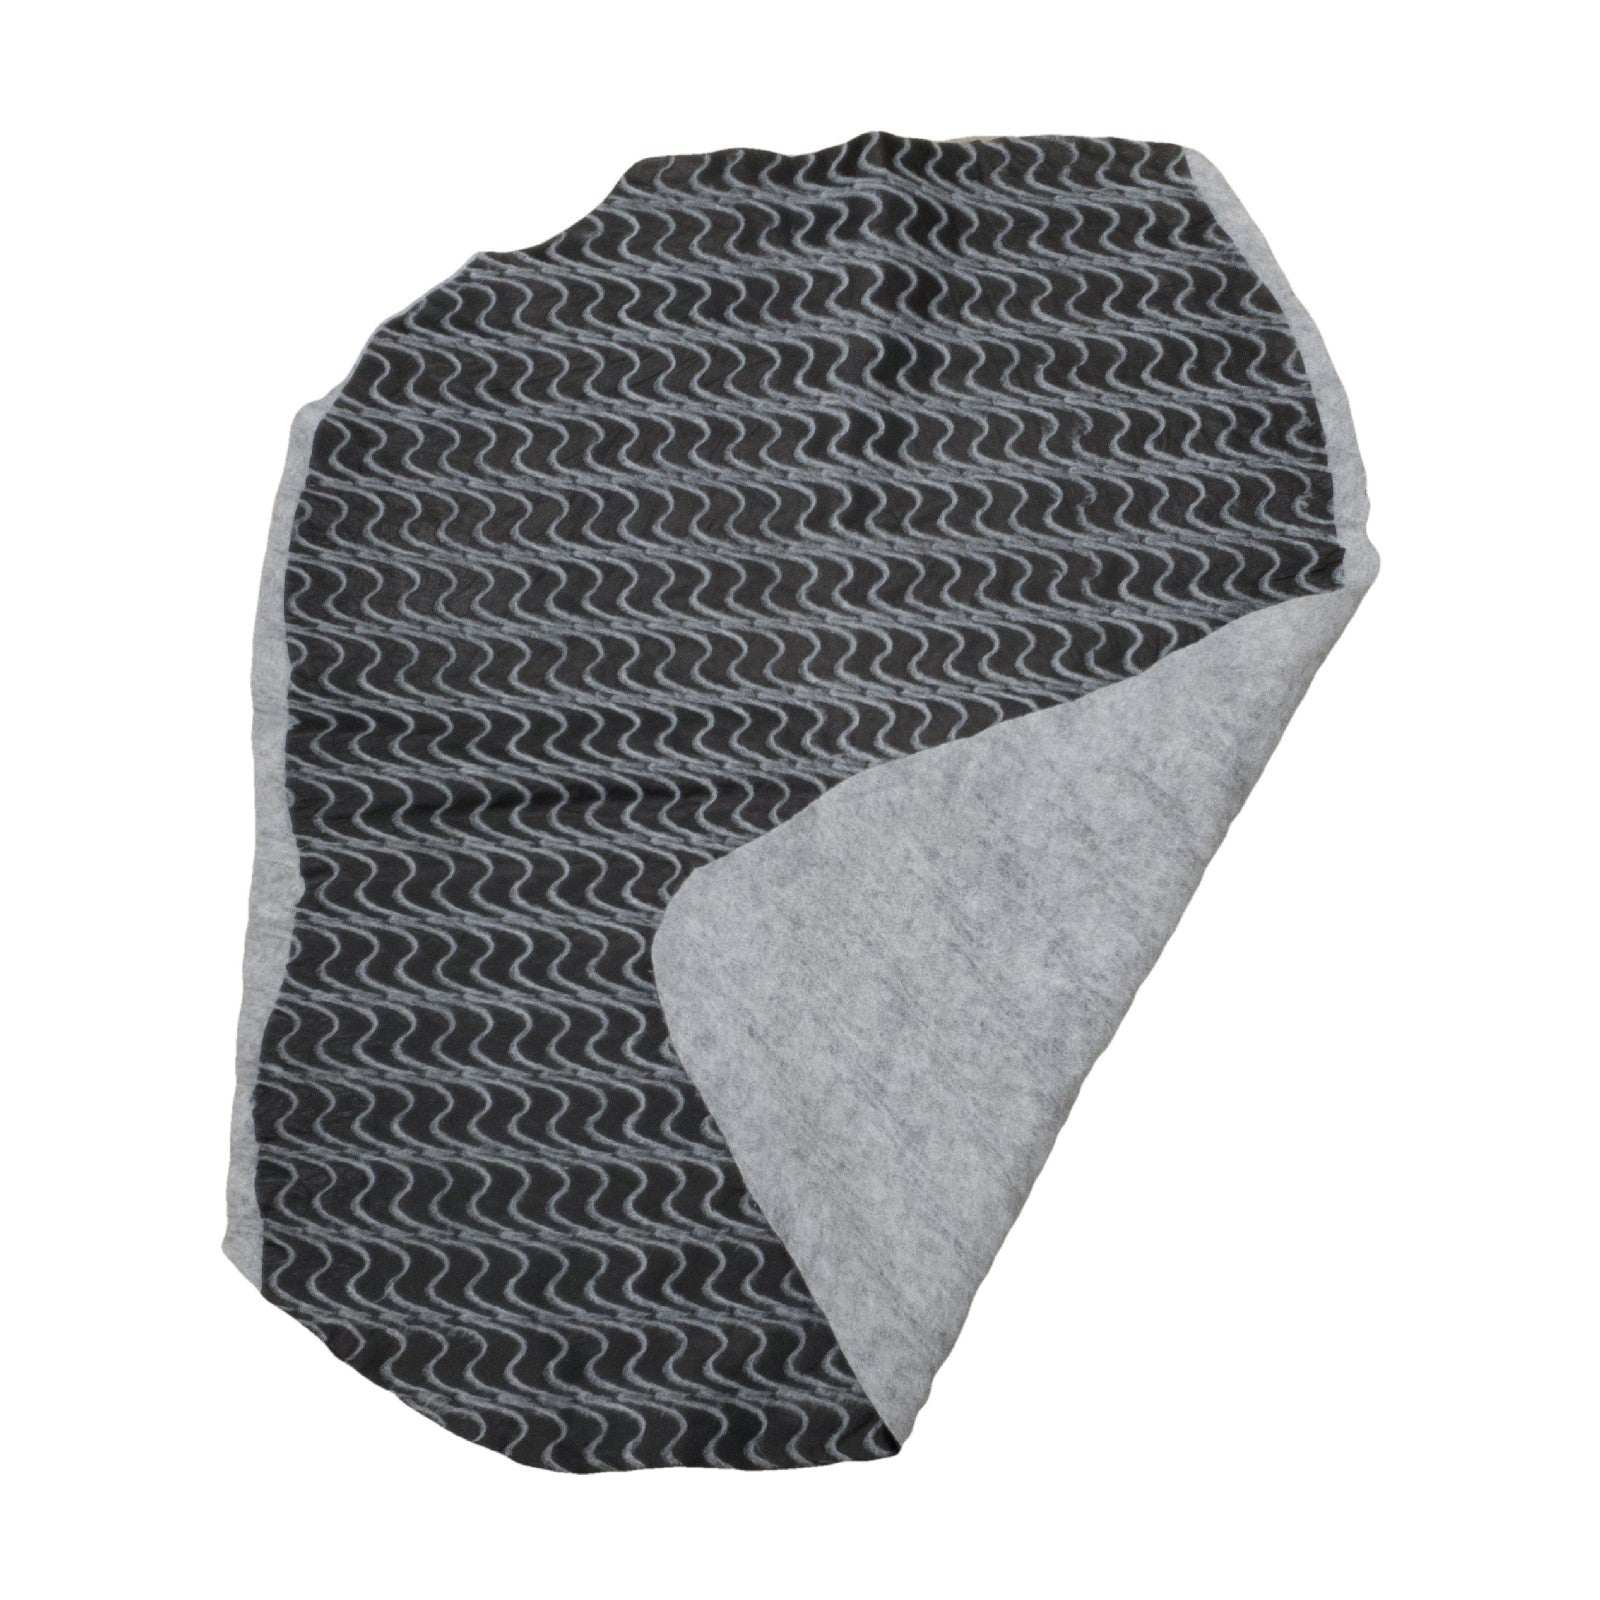 Clearance Quilted, 3-8 Sq Ft, 1-3 oz, Lamb Hides, Black and Grey / 5-6 | The Leather Guy